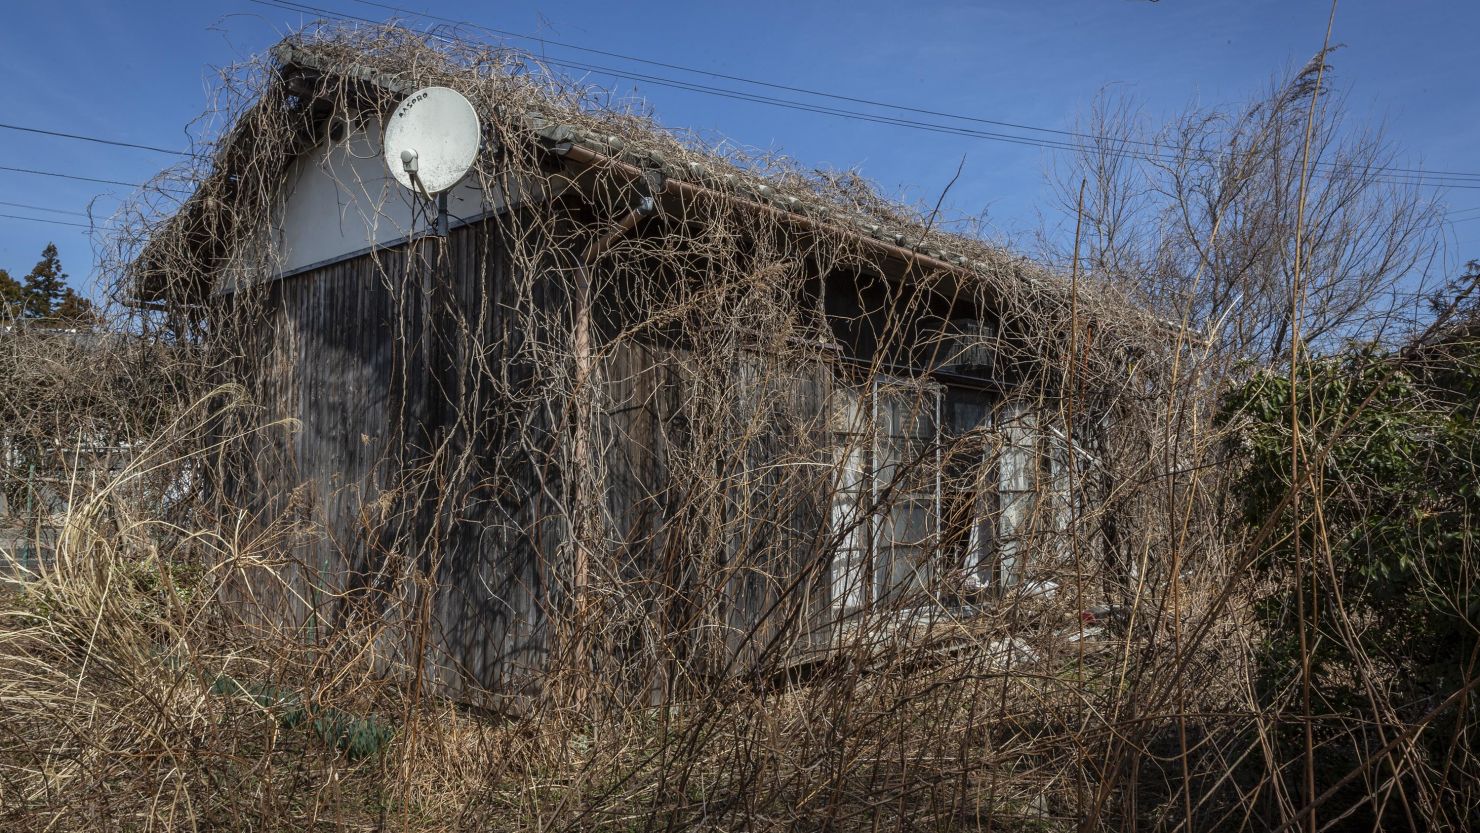 Weeds and vines grow around an abandoned house in Okuma, Japan on March 9, 2023, ahead of ceremonies to mark the 10th anniversary of the 2011 Tohoku earthquake.